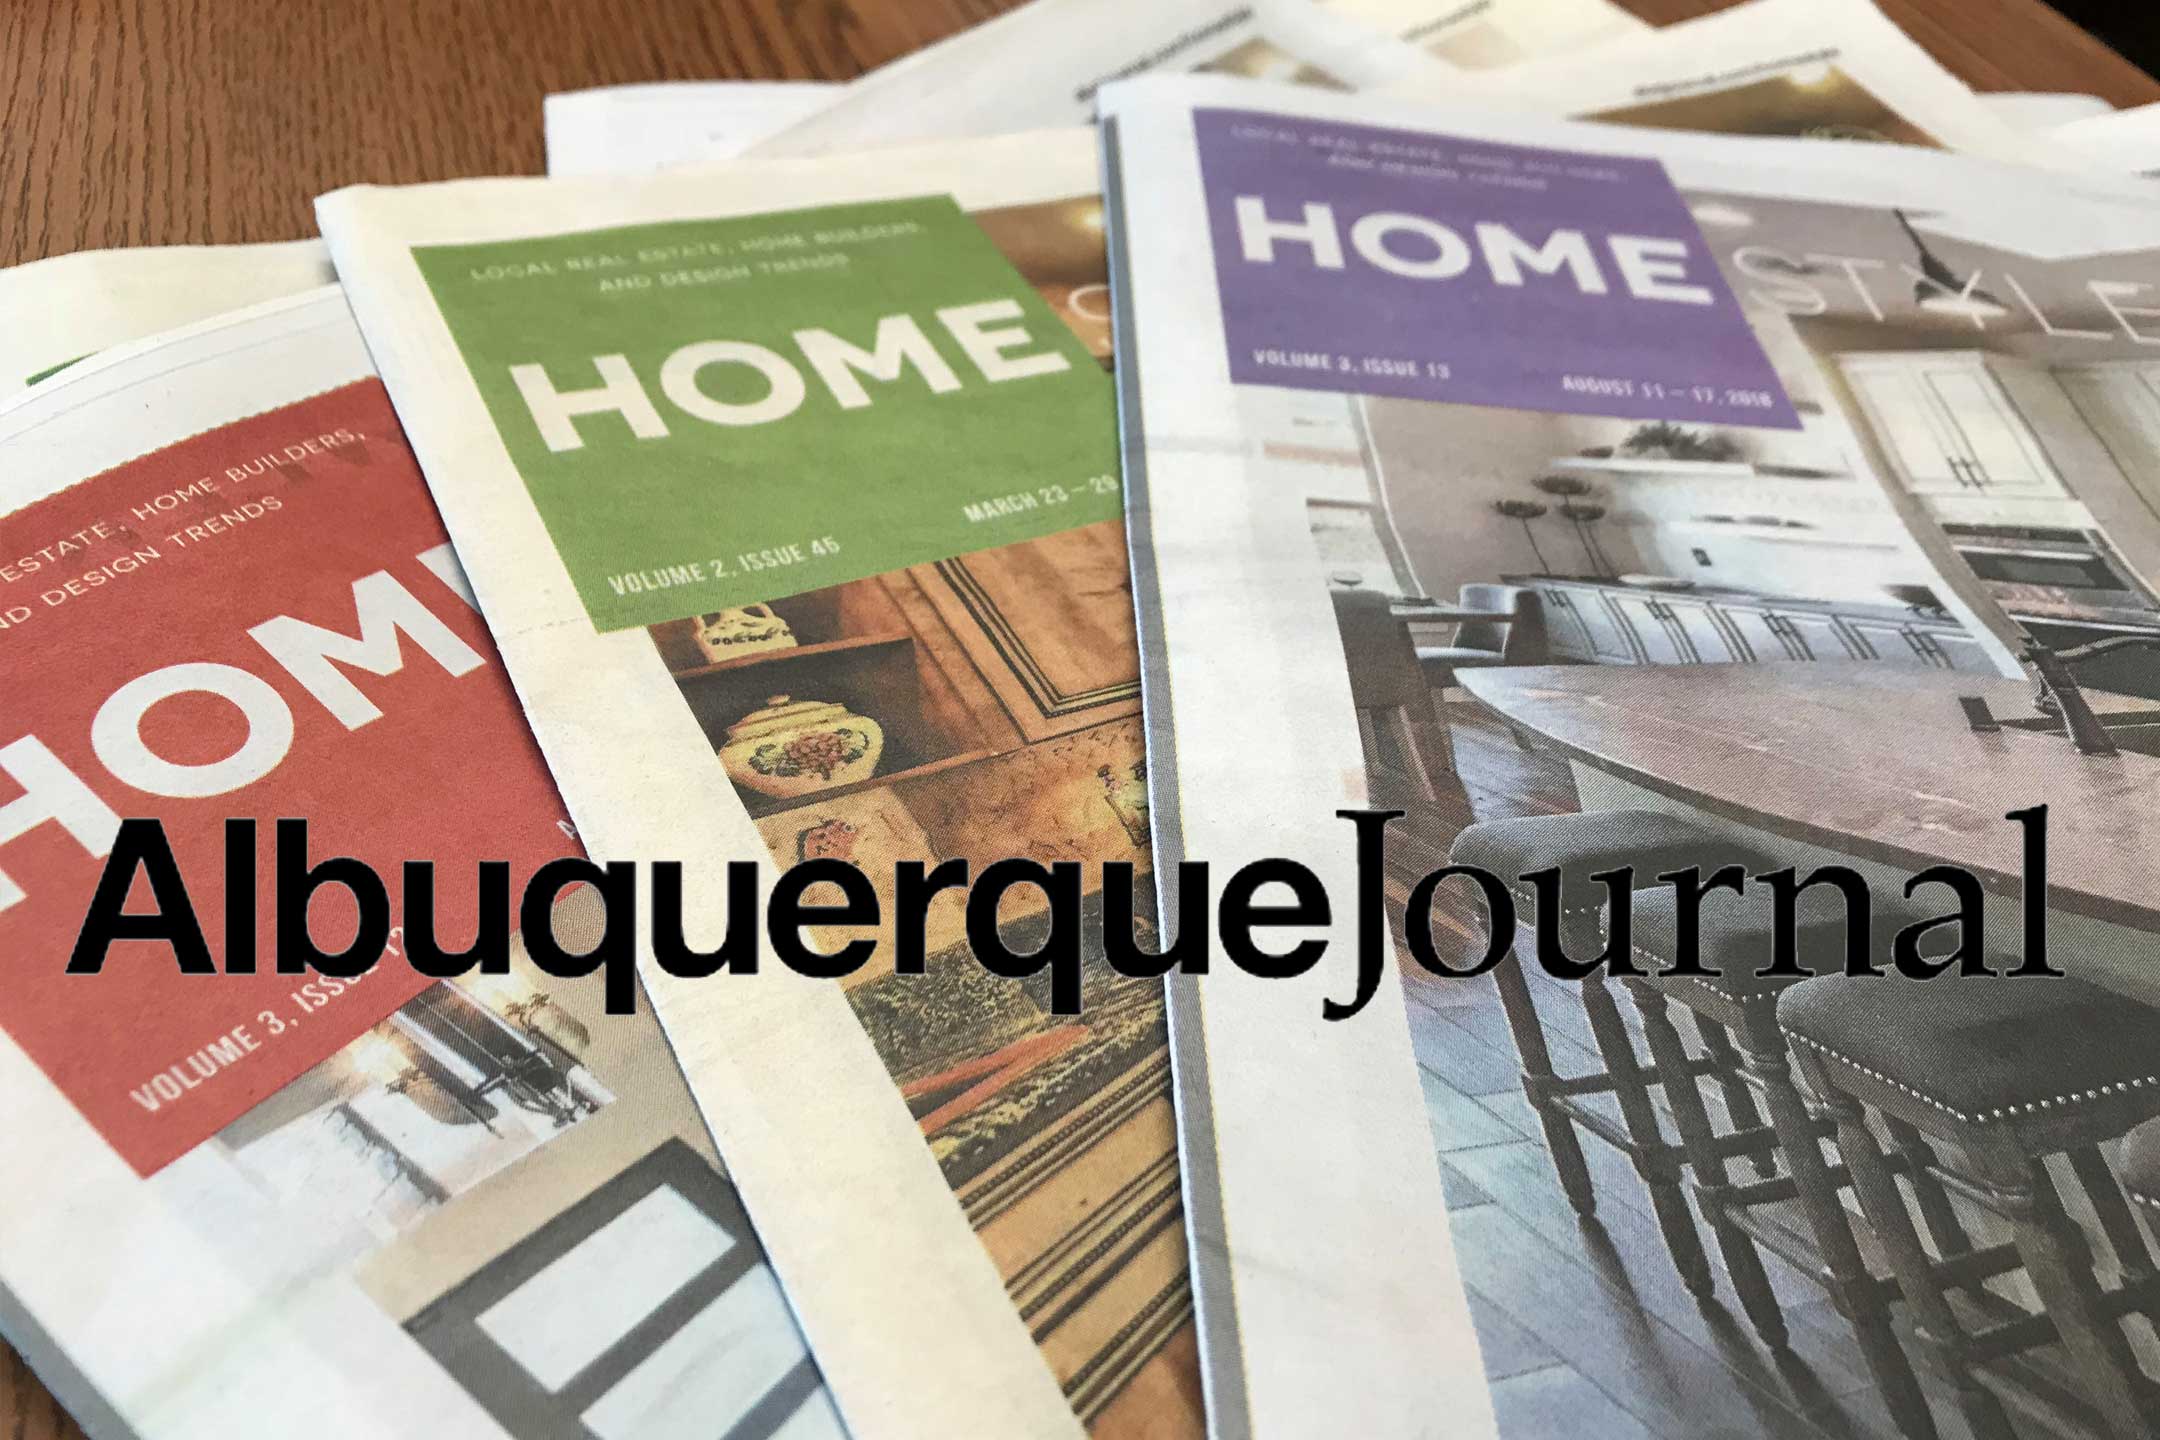 NMHS partners with ABQ Journal: Learn more September 6th